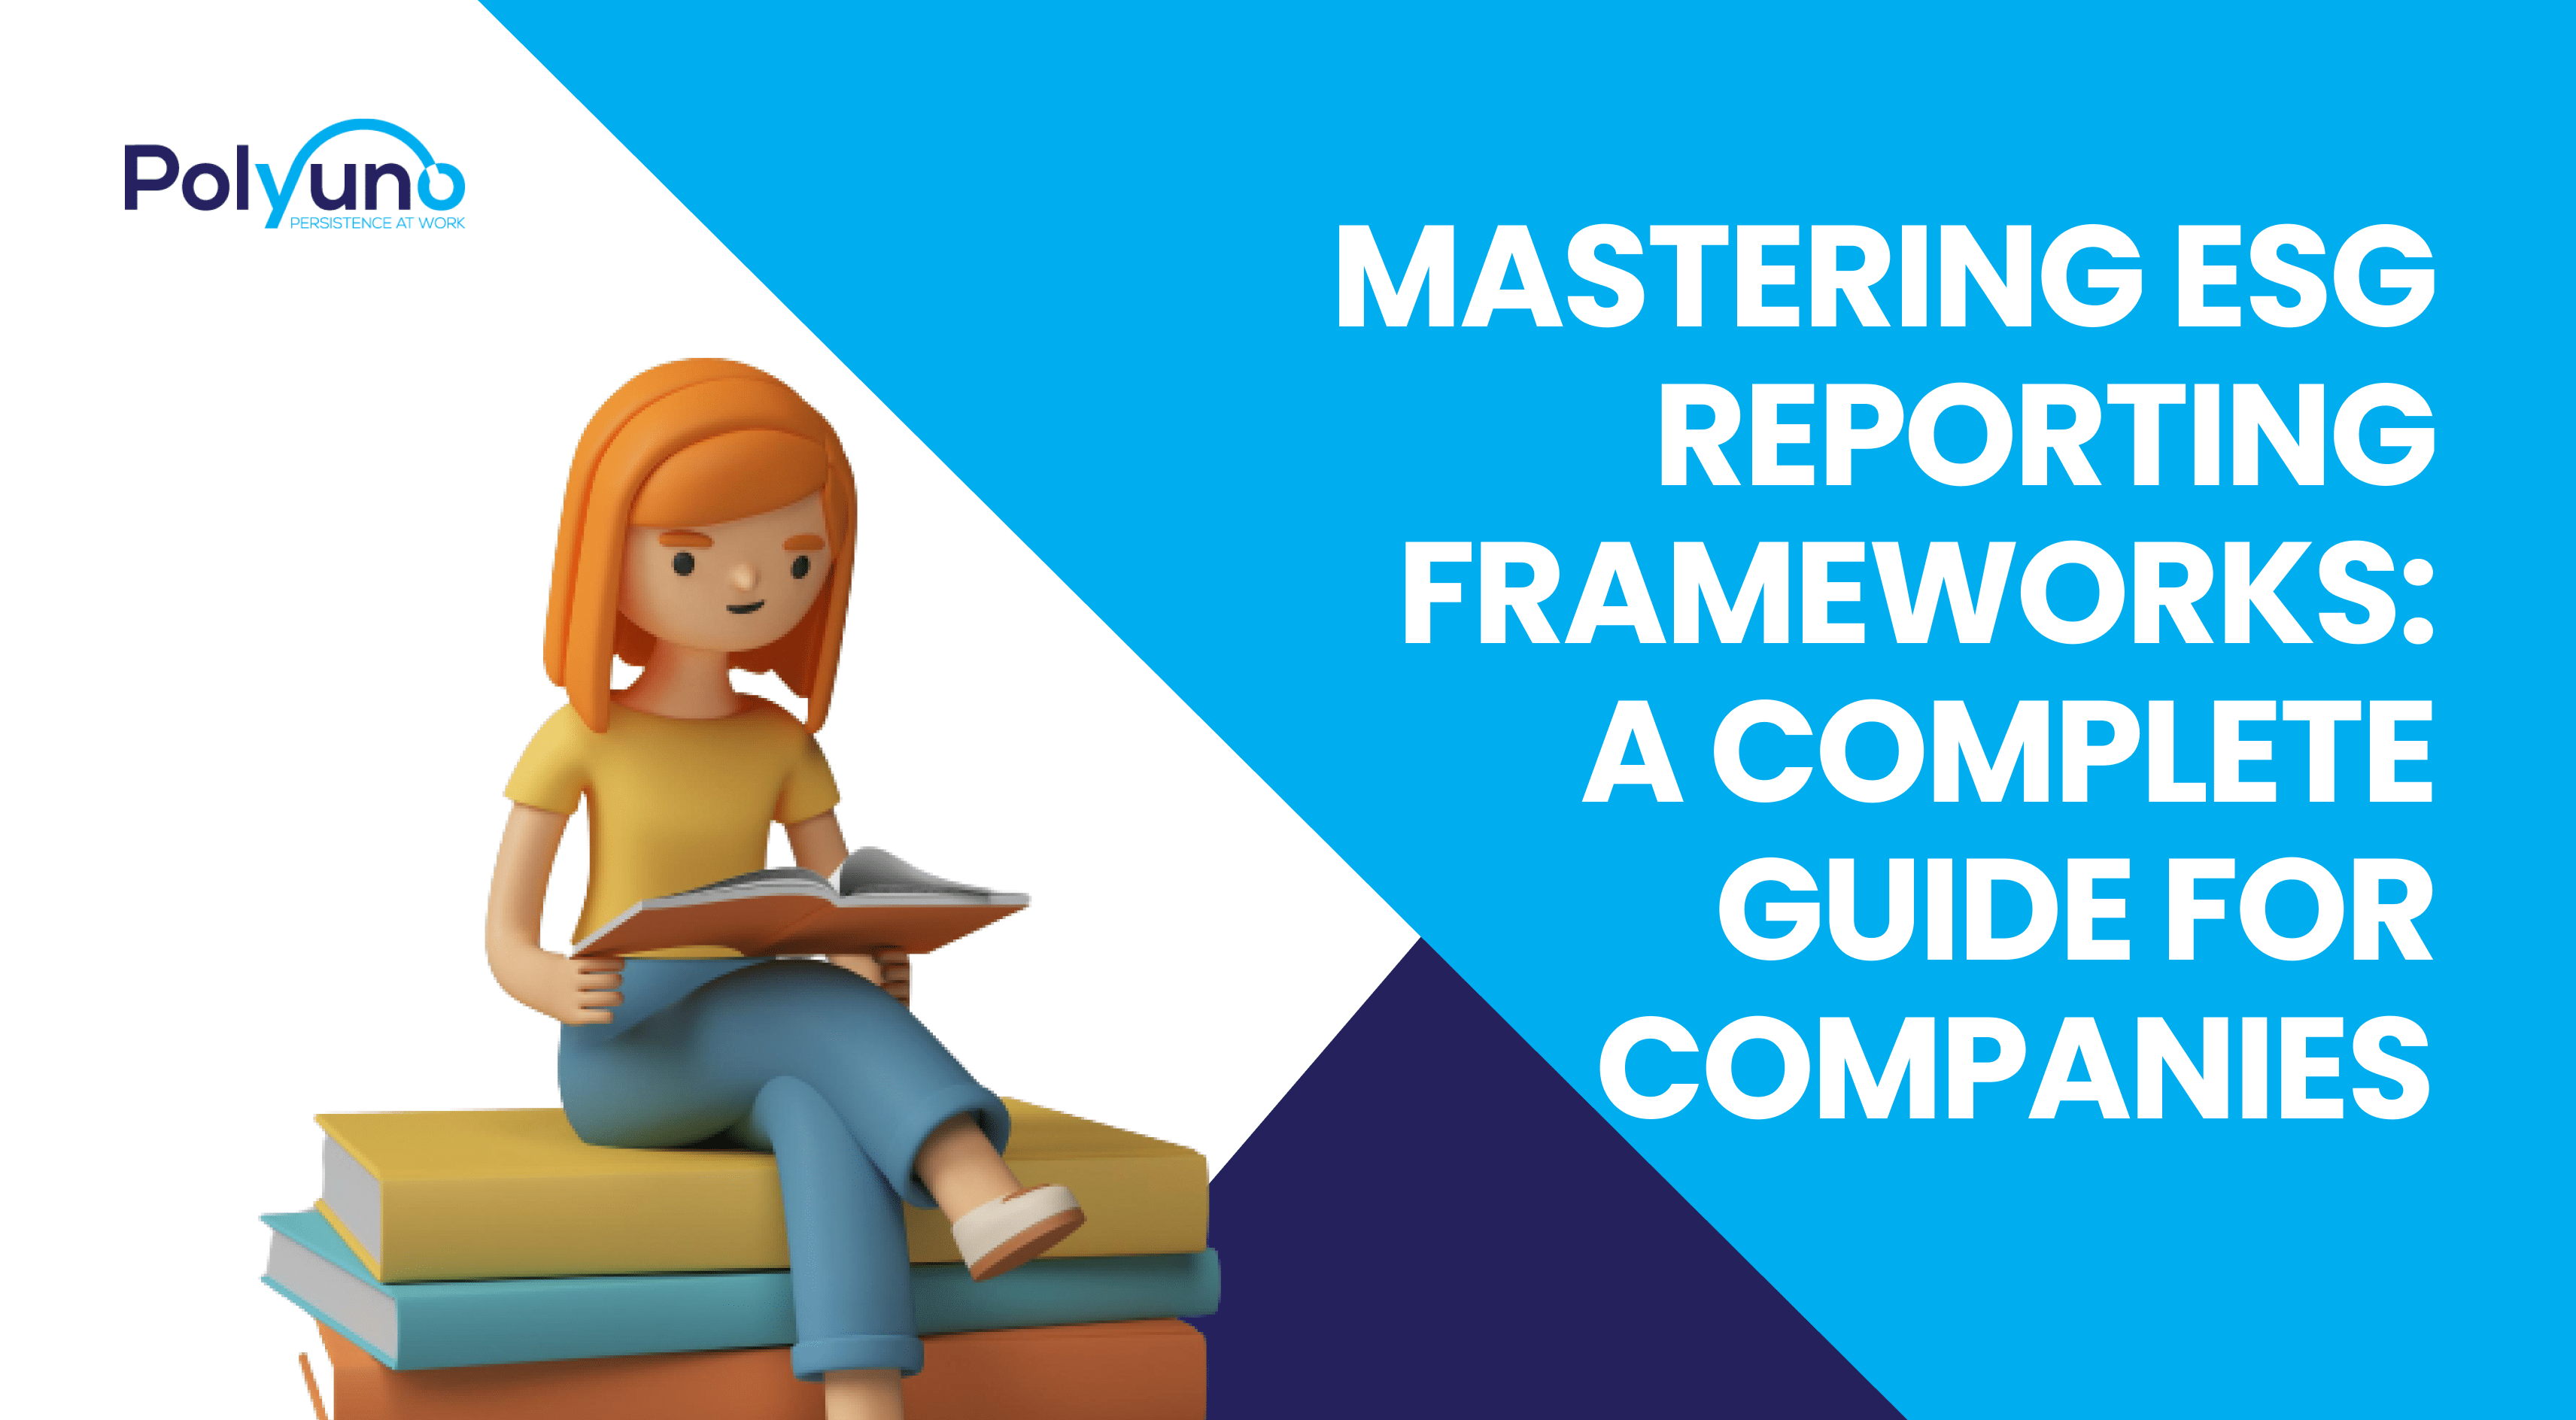 Mastering ESG Reporting Frameworks: A Complete Guide for Companies